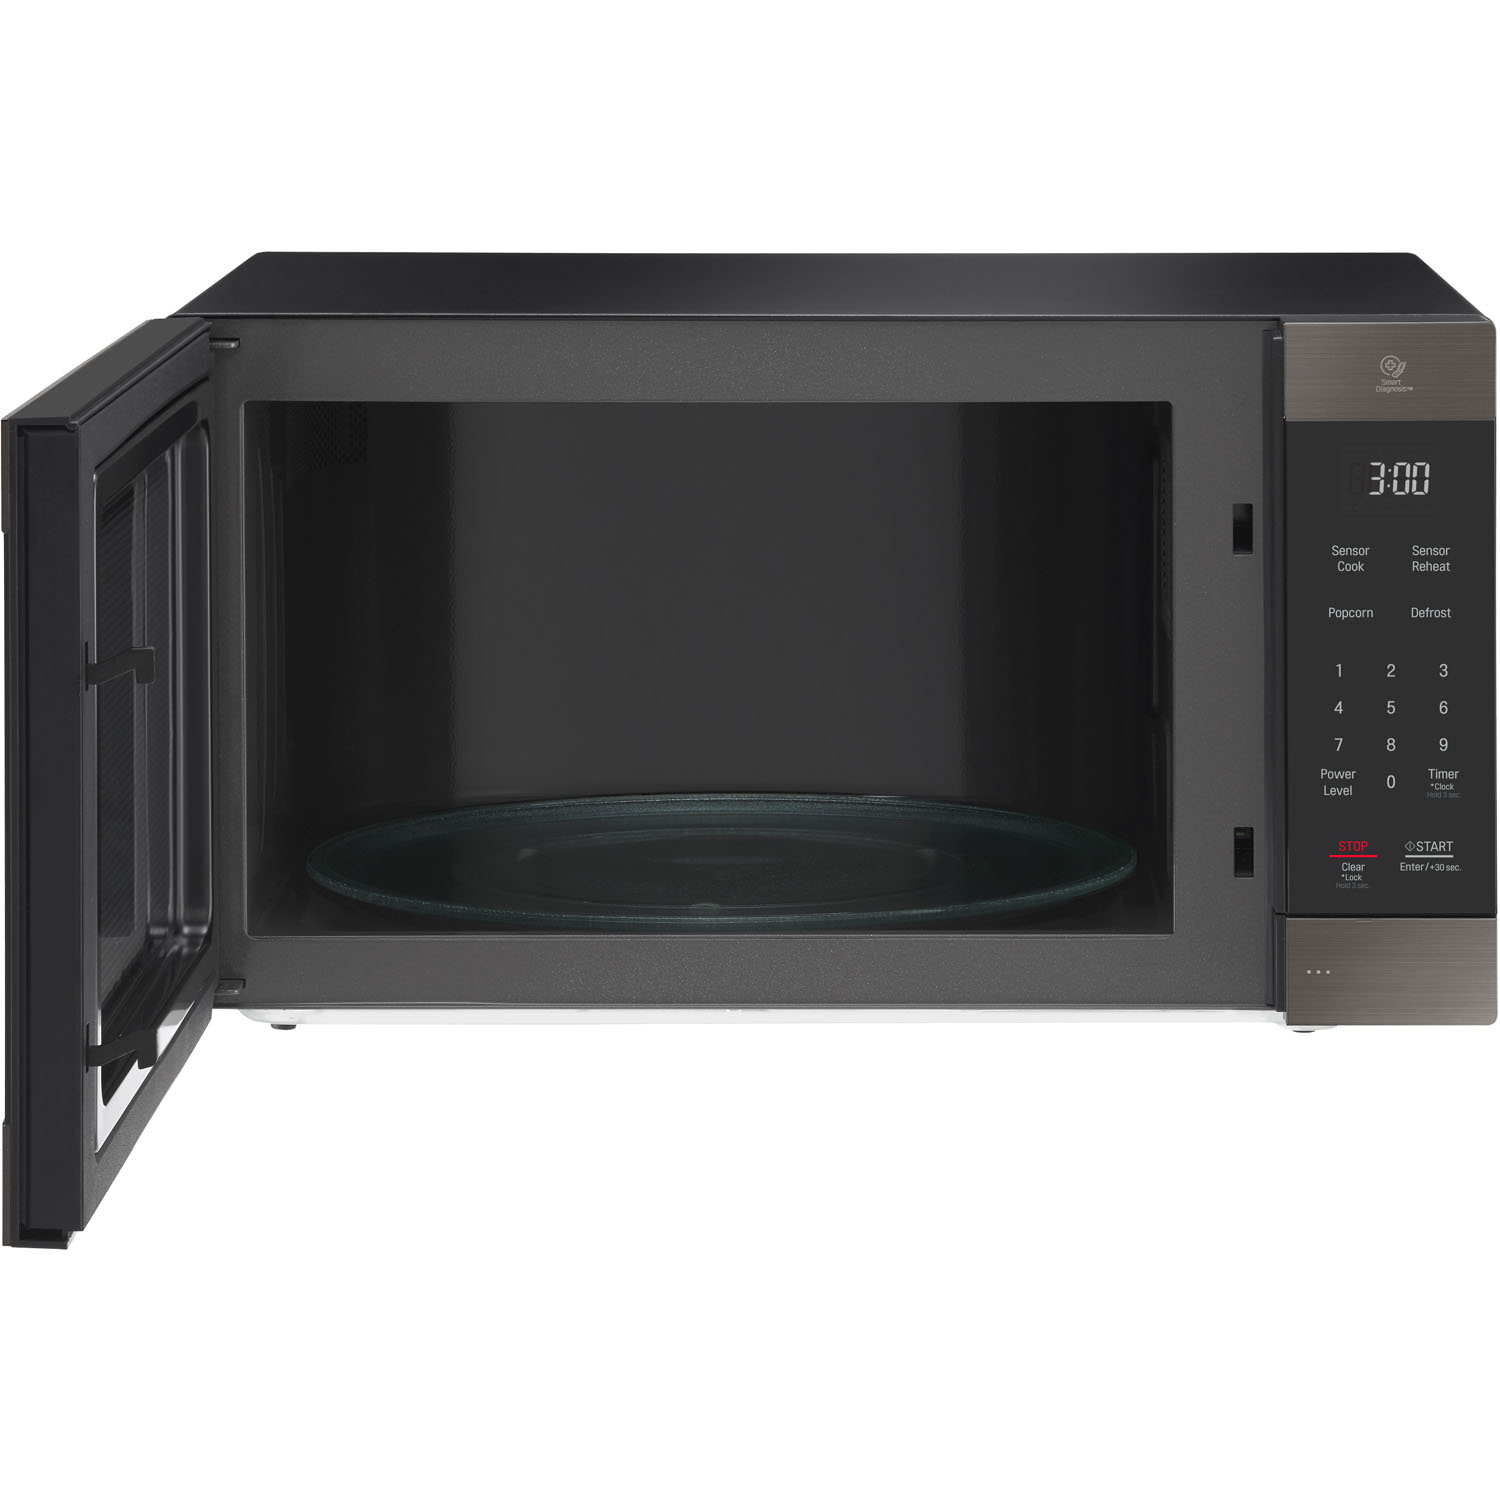 LG NeoChef 2.0 Cu. Ft. 1200W Countertop Microwave, Black Stainless Steel - image 4 of 8